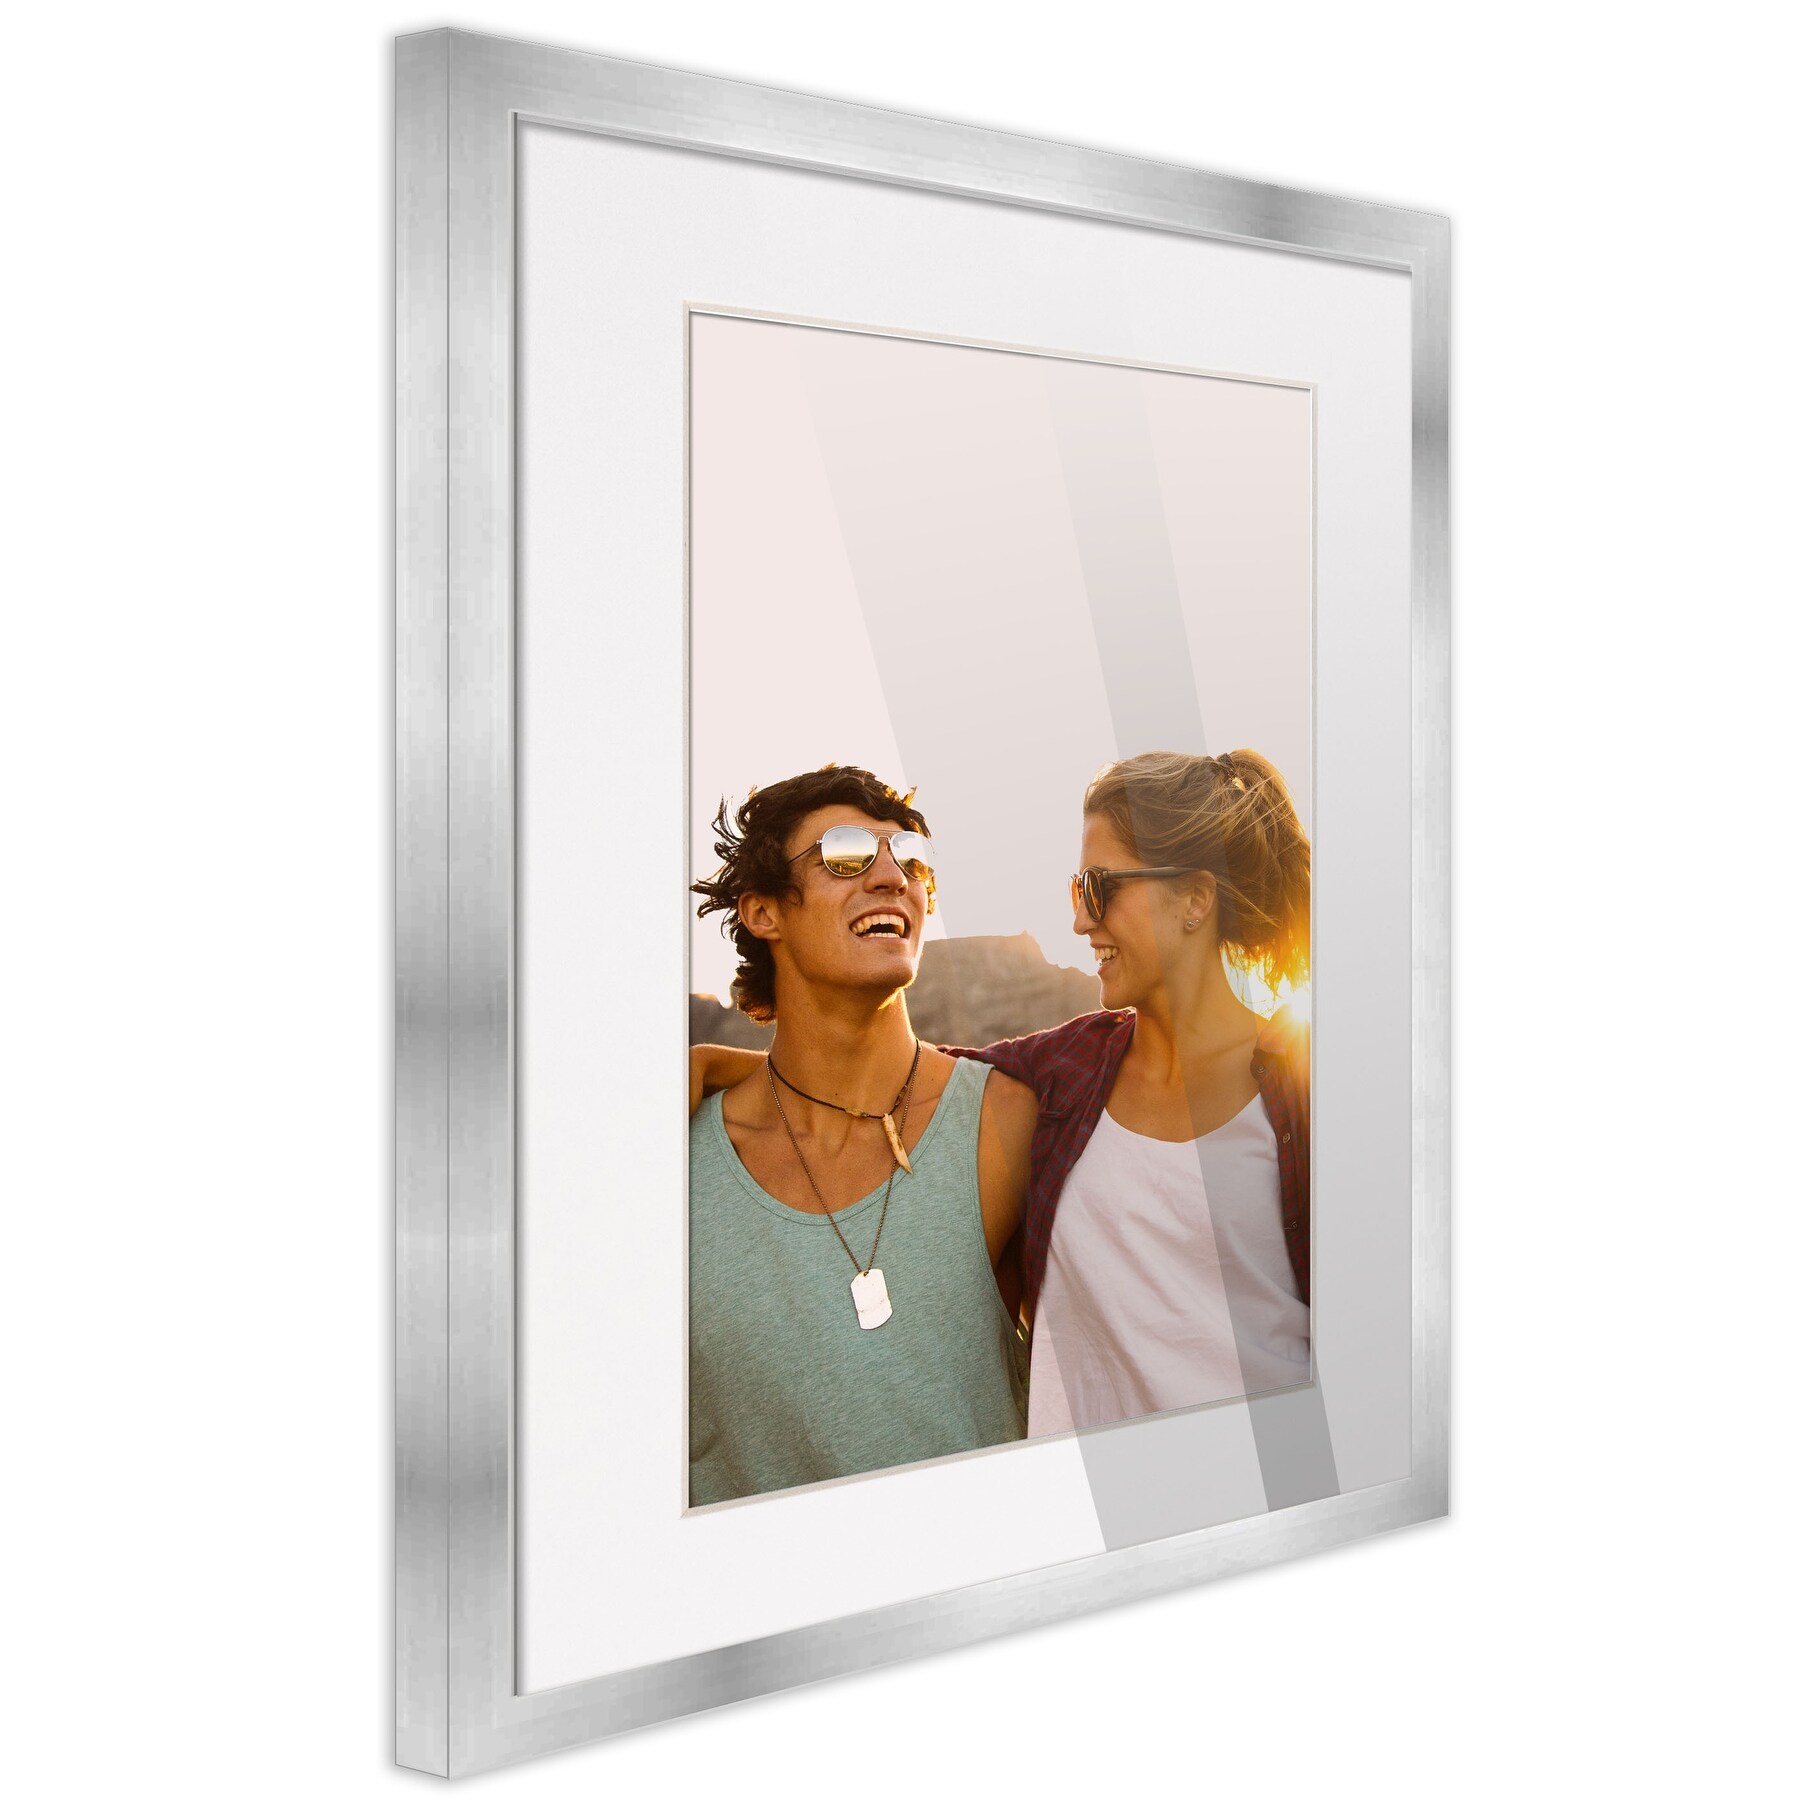  Modern Collage Picture Frames Wall Decor - 14.5x20.5 Natural  Finish Photo Collage Frame with Black Mat For Nine 4x6 Photos , Includes UV  Resistant Acrylic, Acid-Free Backing, Hanging Hardware